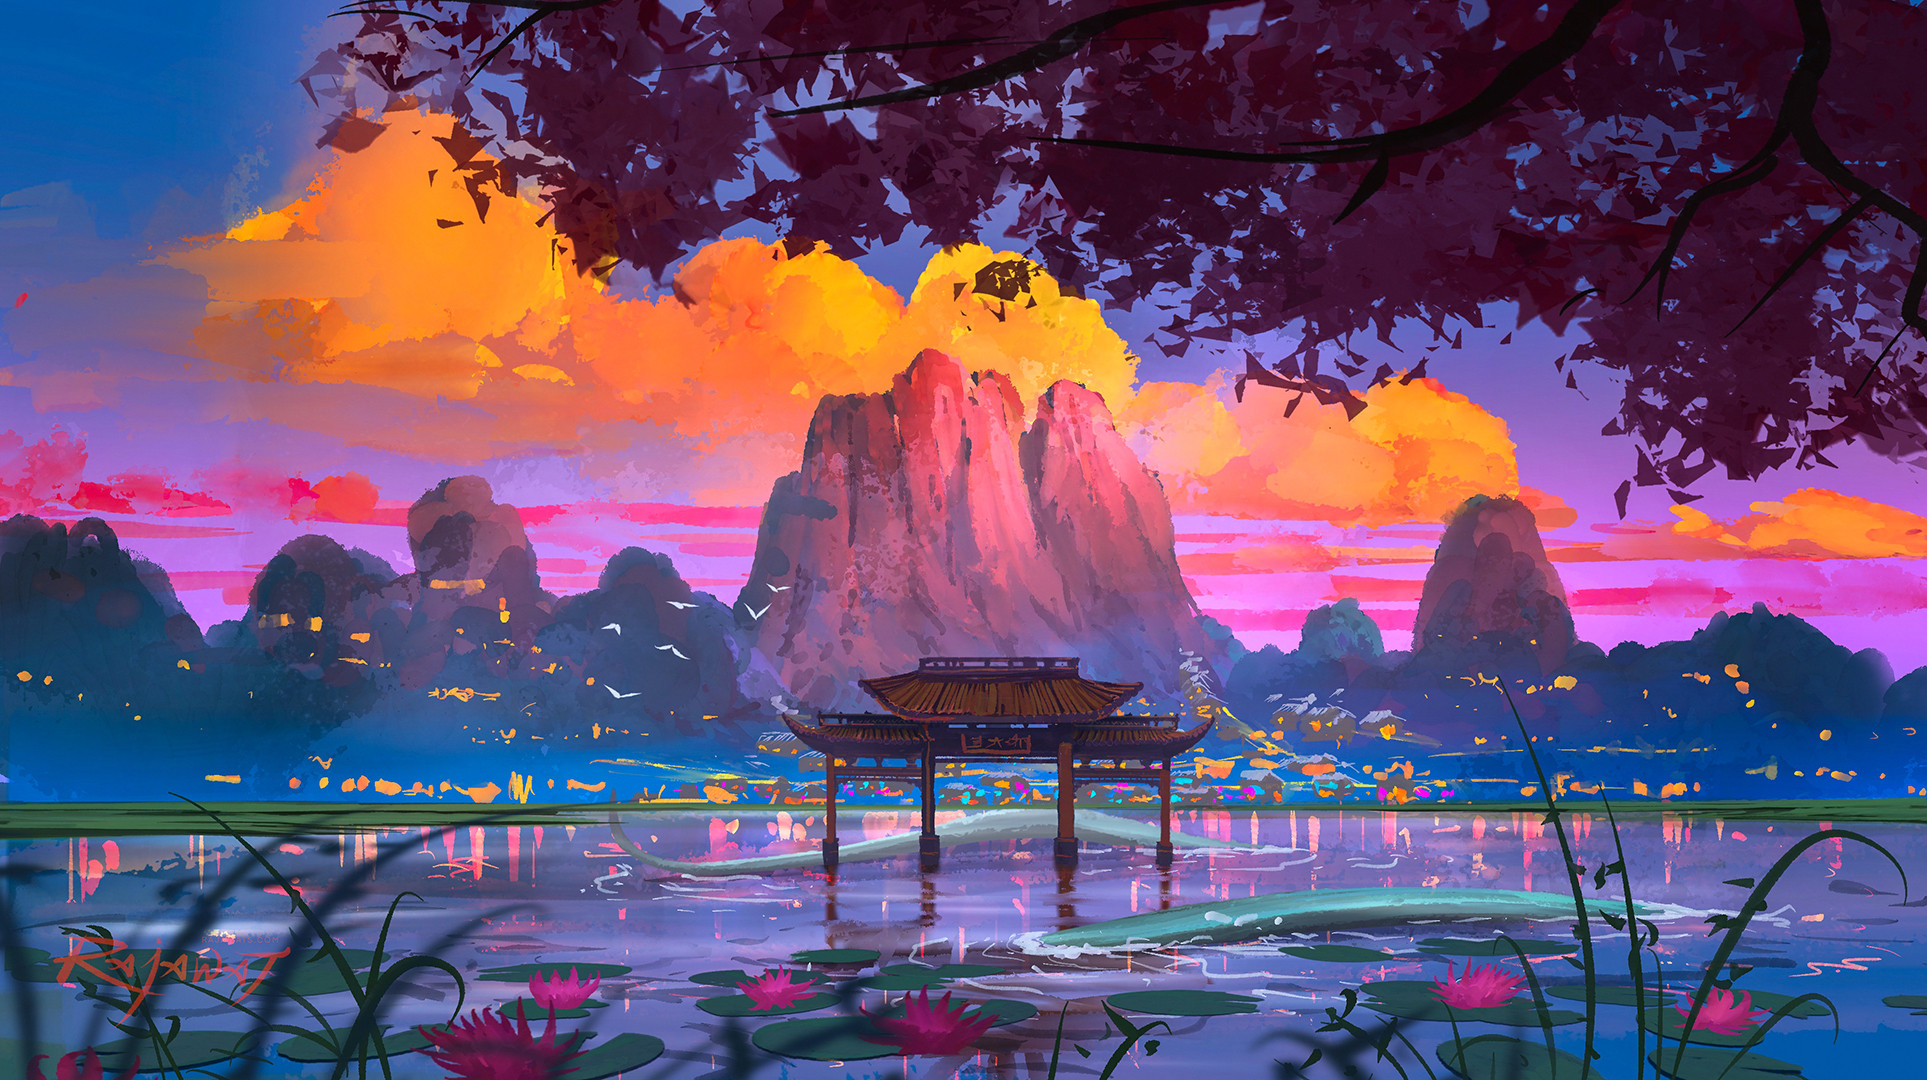 Artwork Digital Art Nature Mountains Flowers Water Lily Pads Clouds 1927x1080